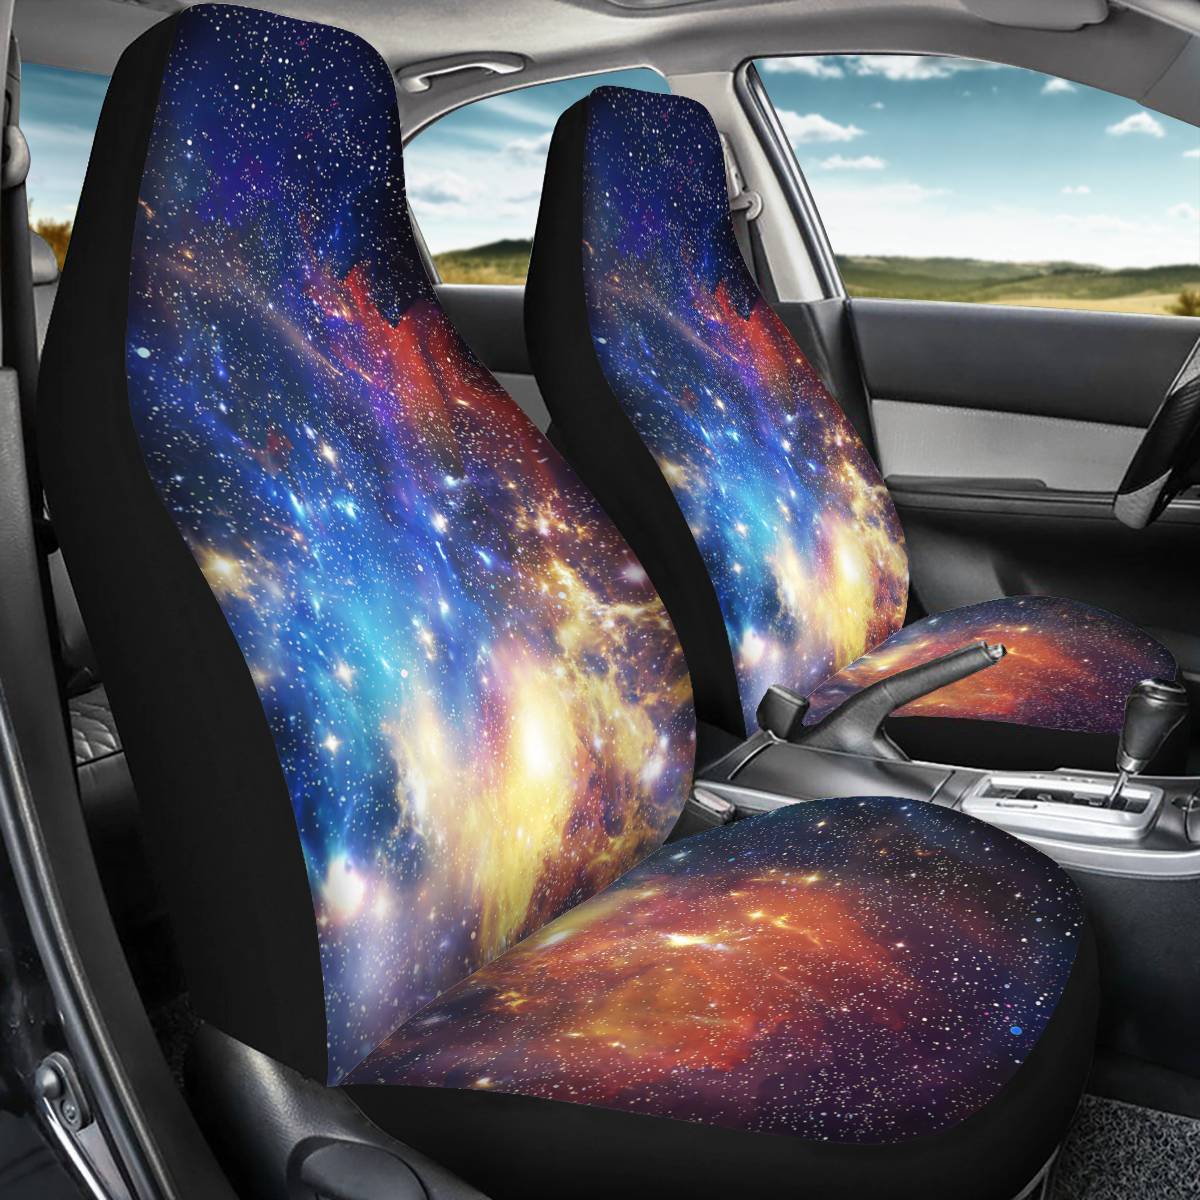 2 Pieces Wearproof Dirt-proof Easy to Clean Front Single Car Seat Covers Galaxy Summer Cooling Four Seasons Car Seat Covers for Front Two Seats Comes with 2 Pieces - Honeycomb Cloth